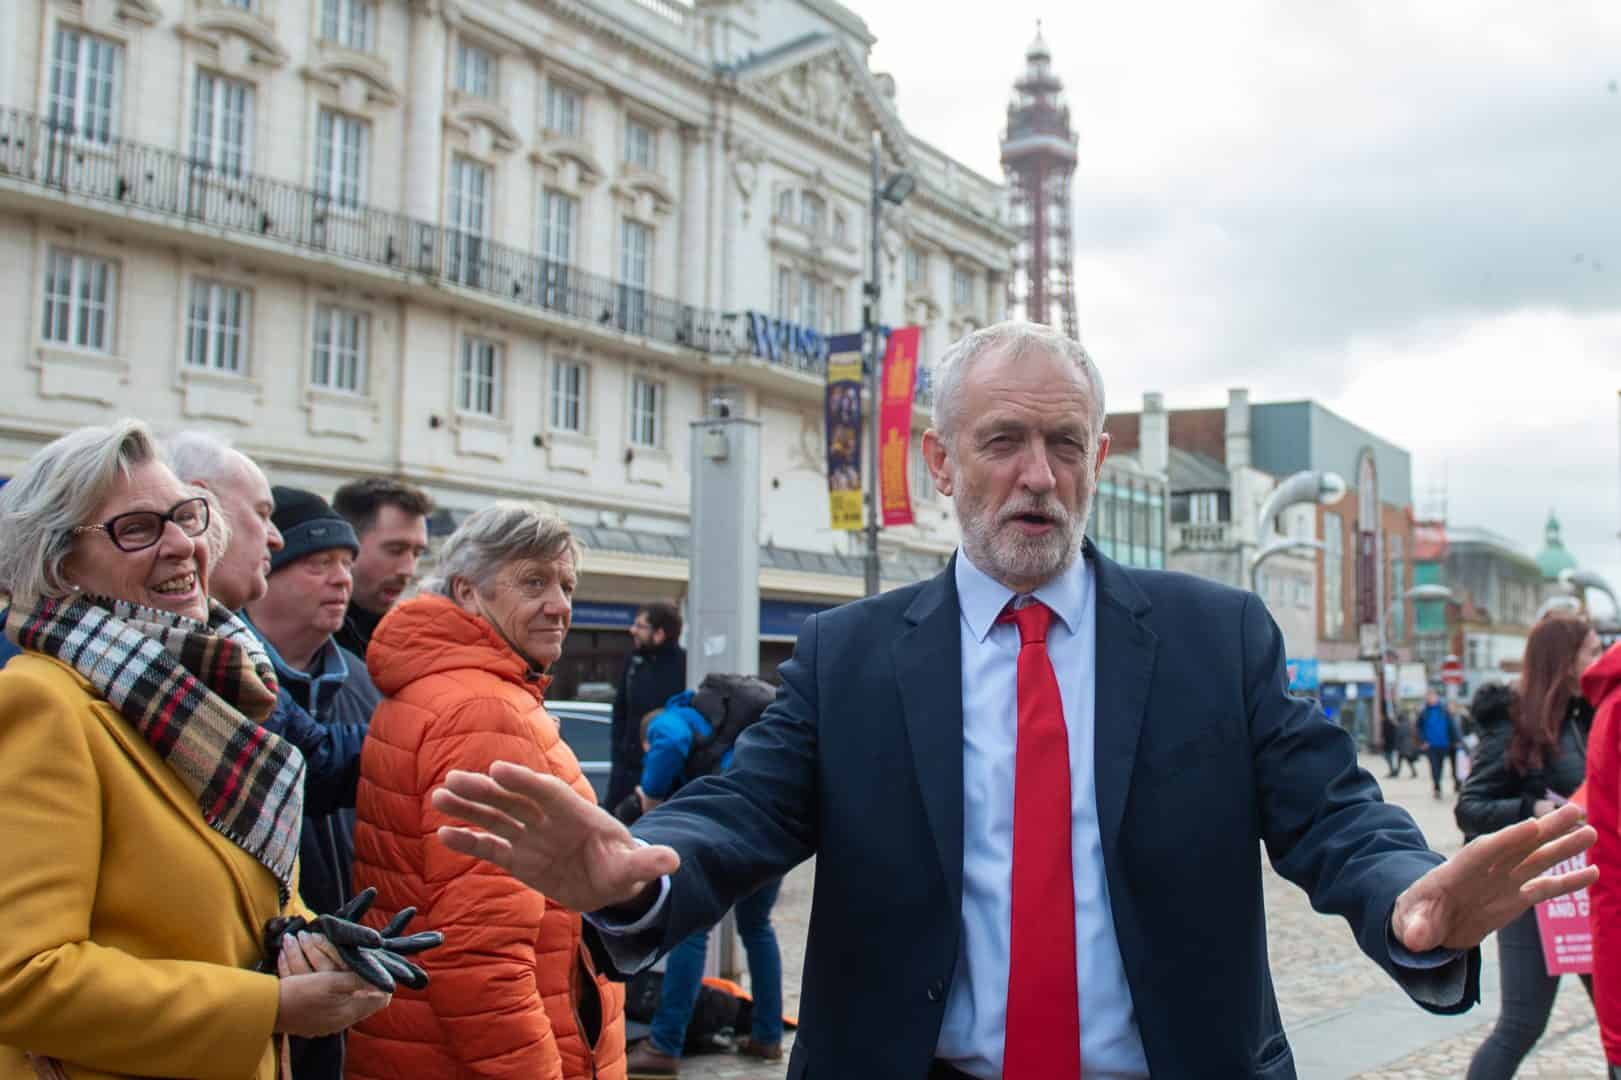 Corbyn attempts to win over Brexit-backing Blackpool with radical vision for its future